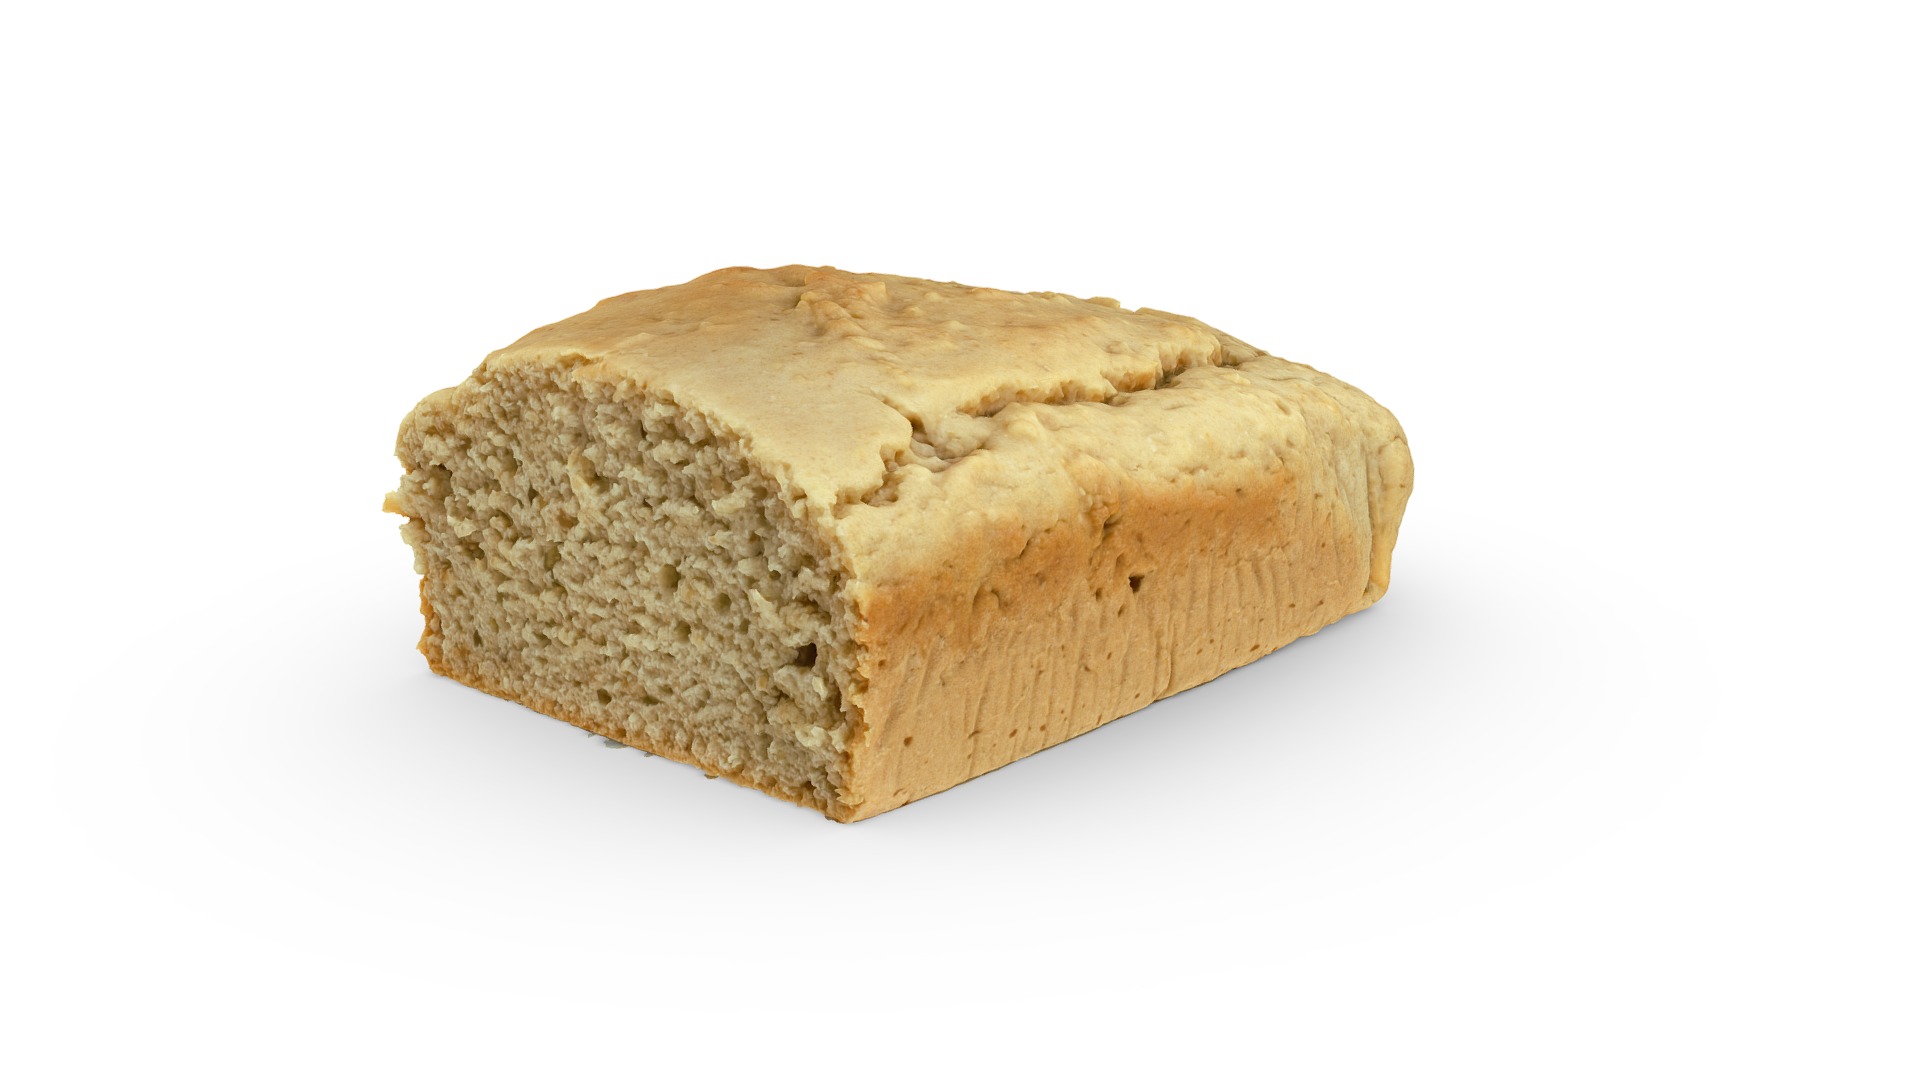 3D model Reddit Peanut Butter Bread - This is a 3D model of the Reddit Peanut Butter Bread. The 3D model is about a loaf of bread.